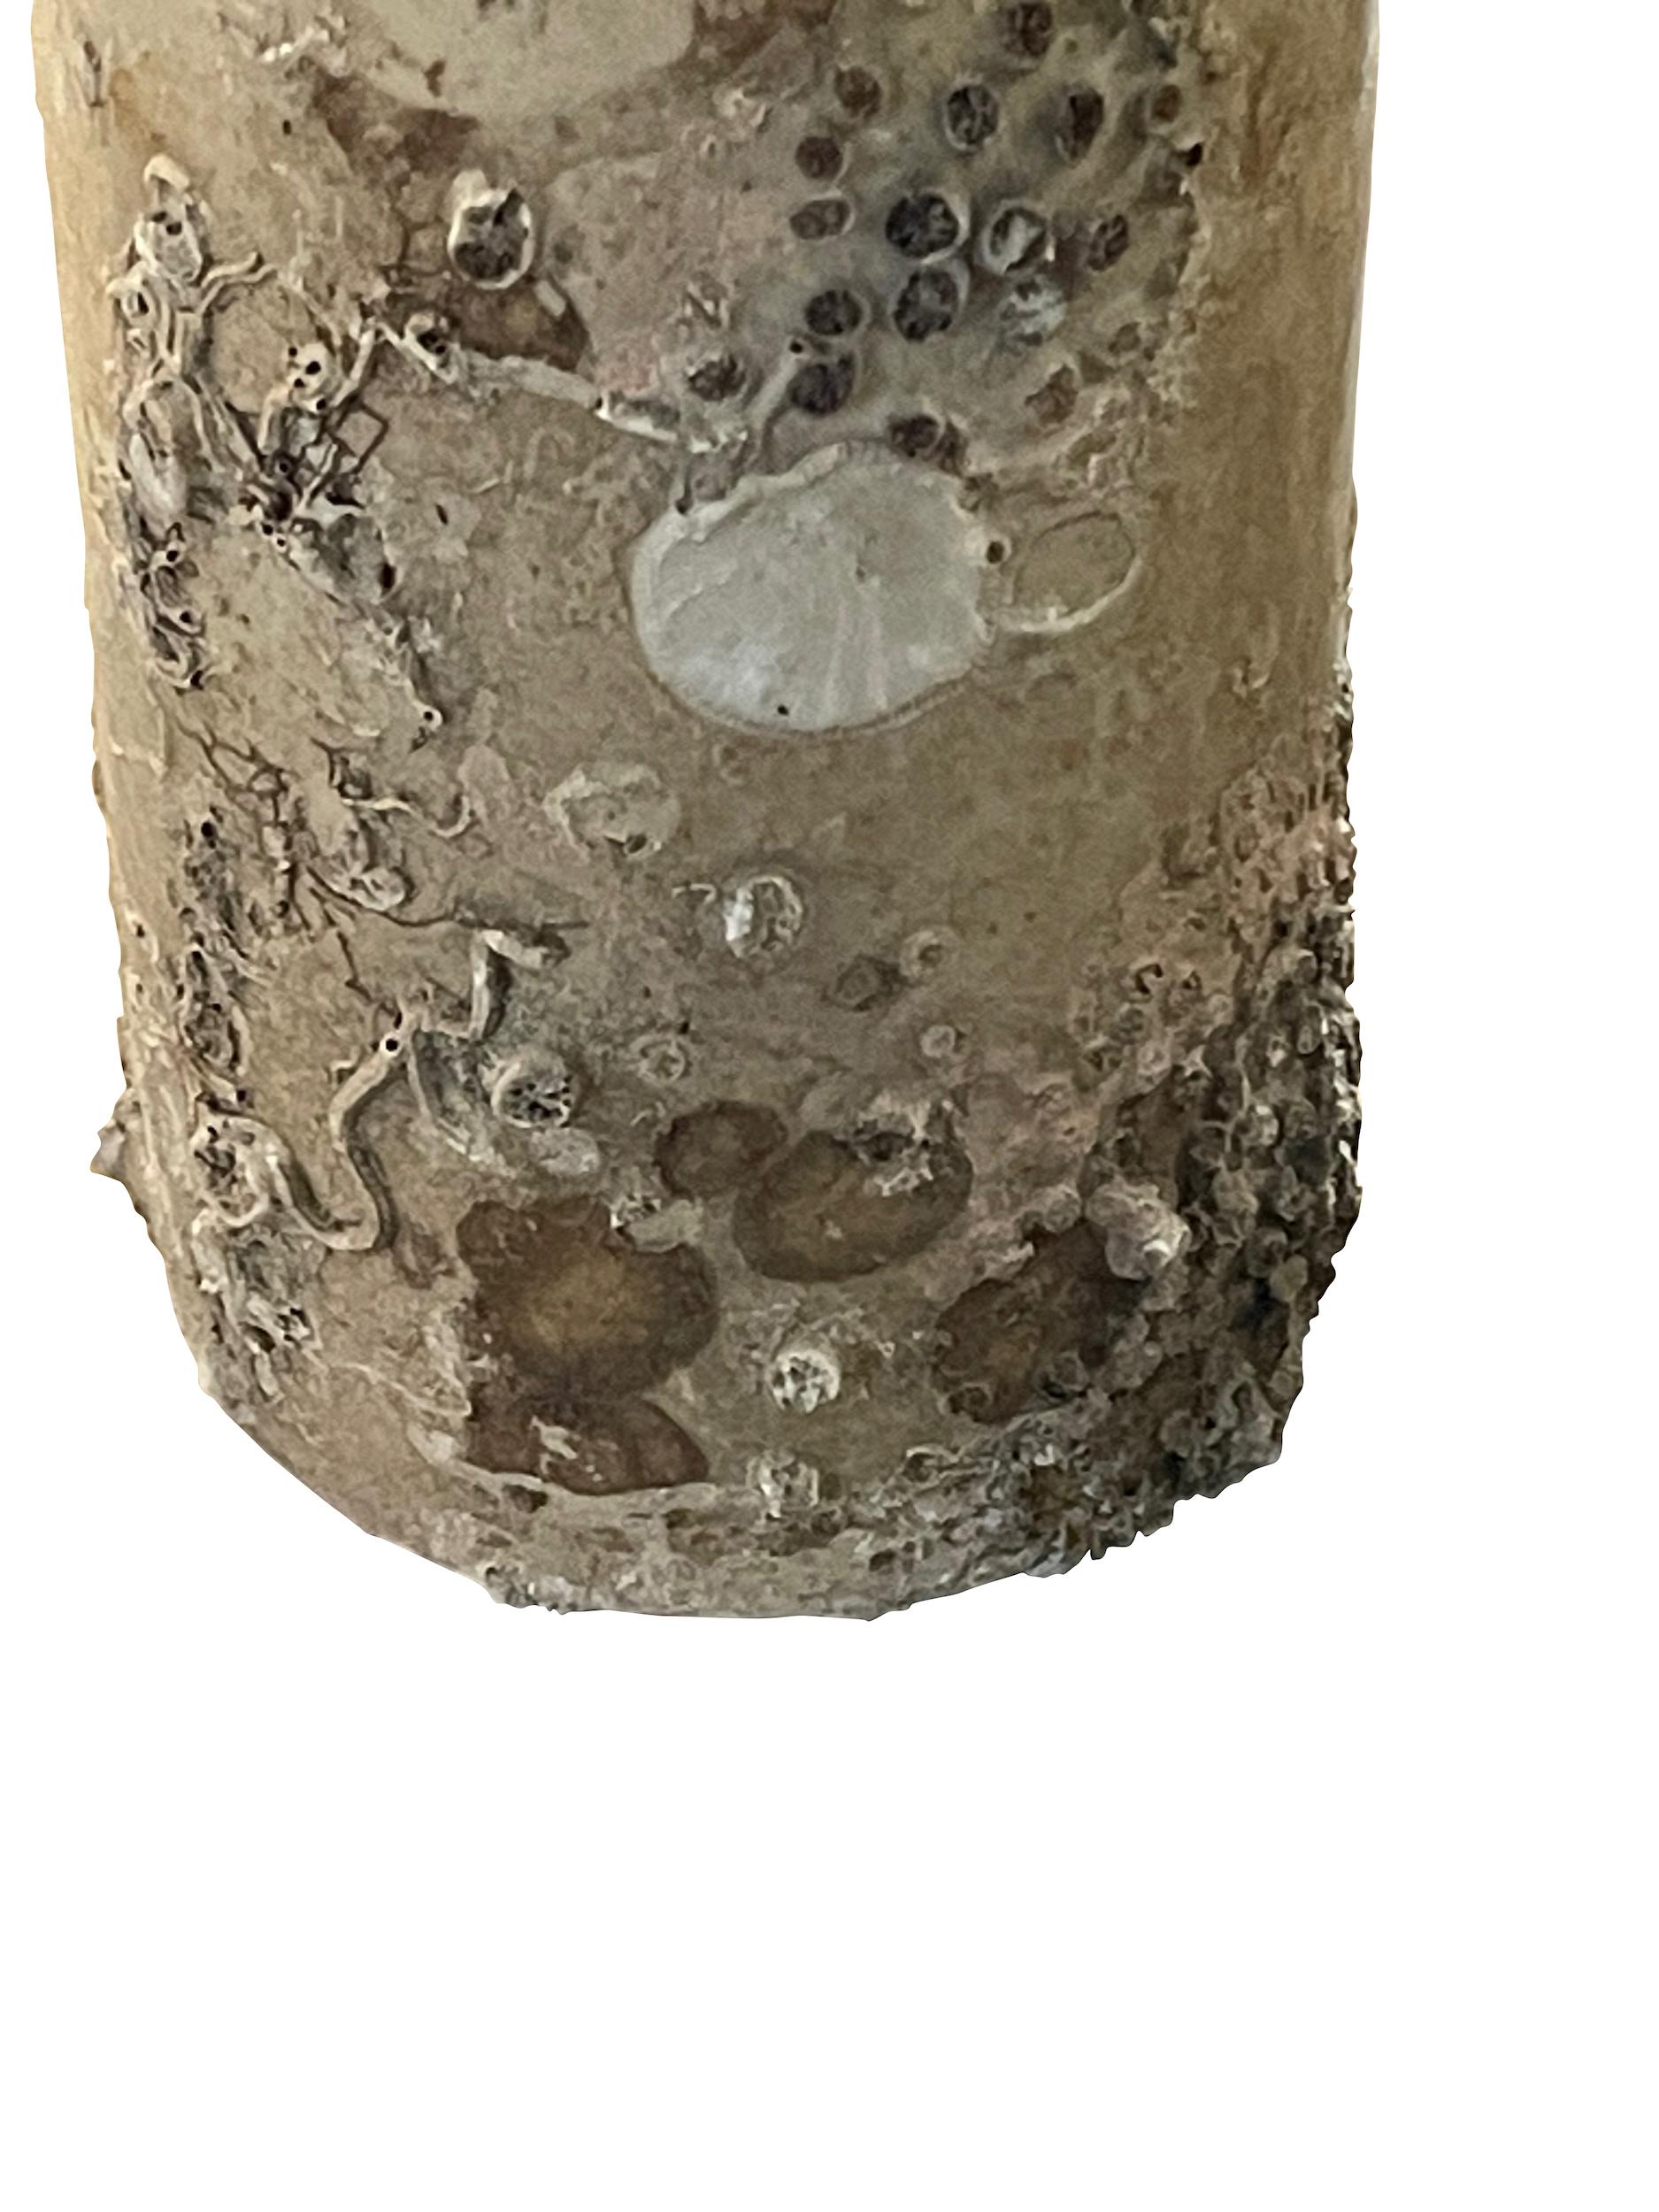 19th century Dutch ship wrecked absinthe bottle.
Original and beautiful barnacles and shells from
being under water for over 100 years.
Three available and sold individually.